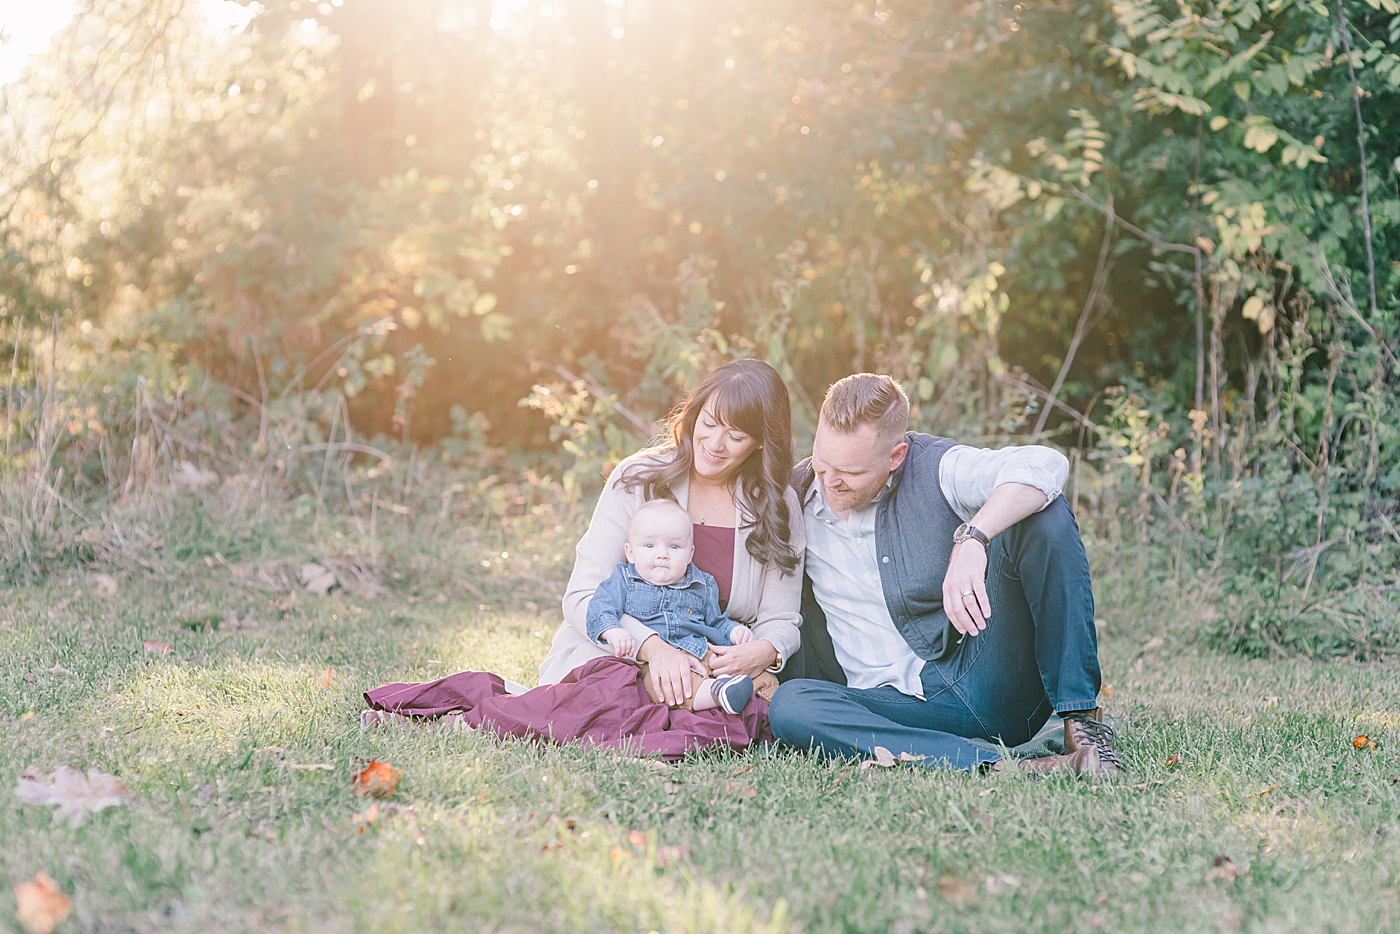 Mom and dad sitting with baby in the grass | Photo by Anna Wisjo Photography